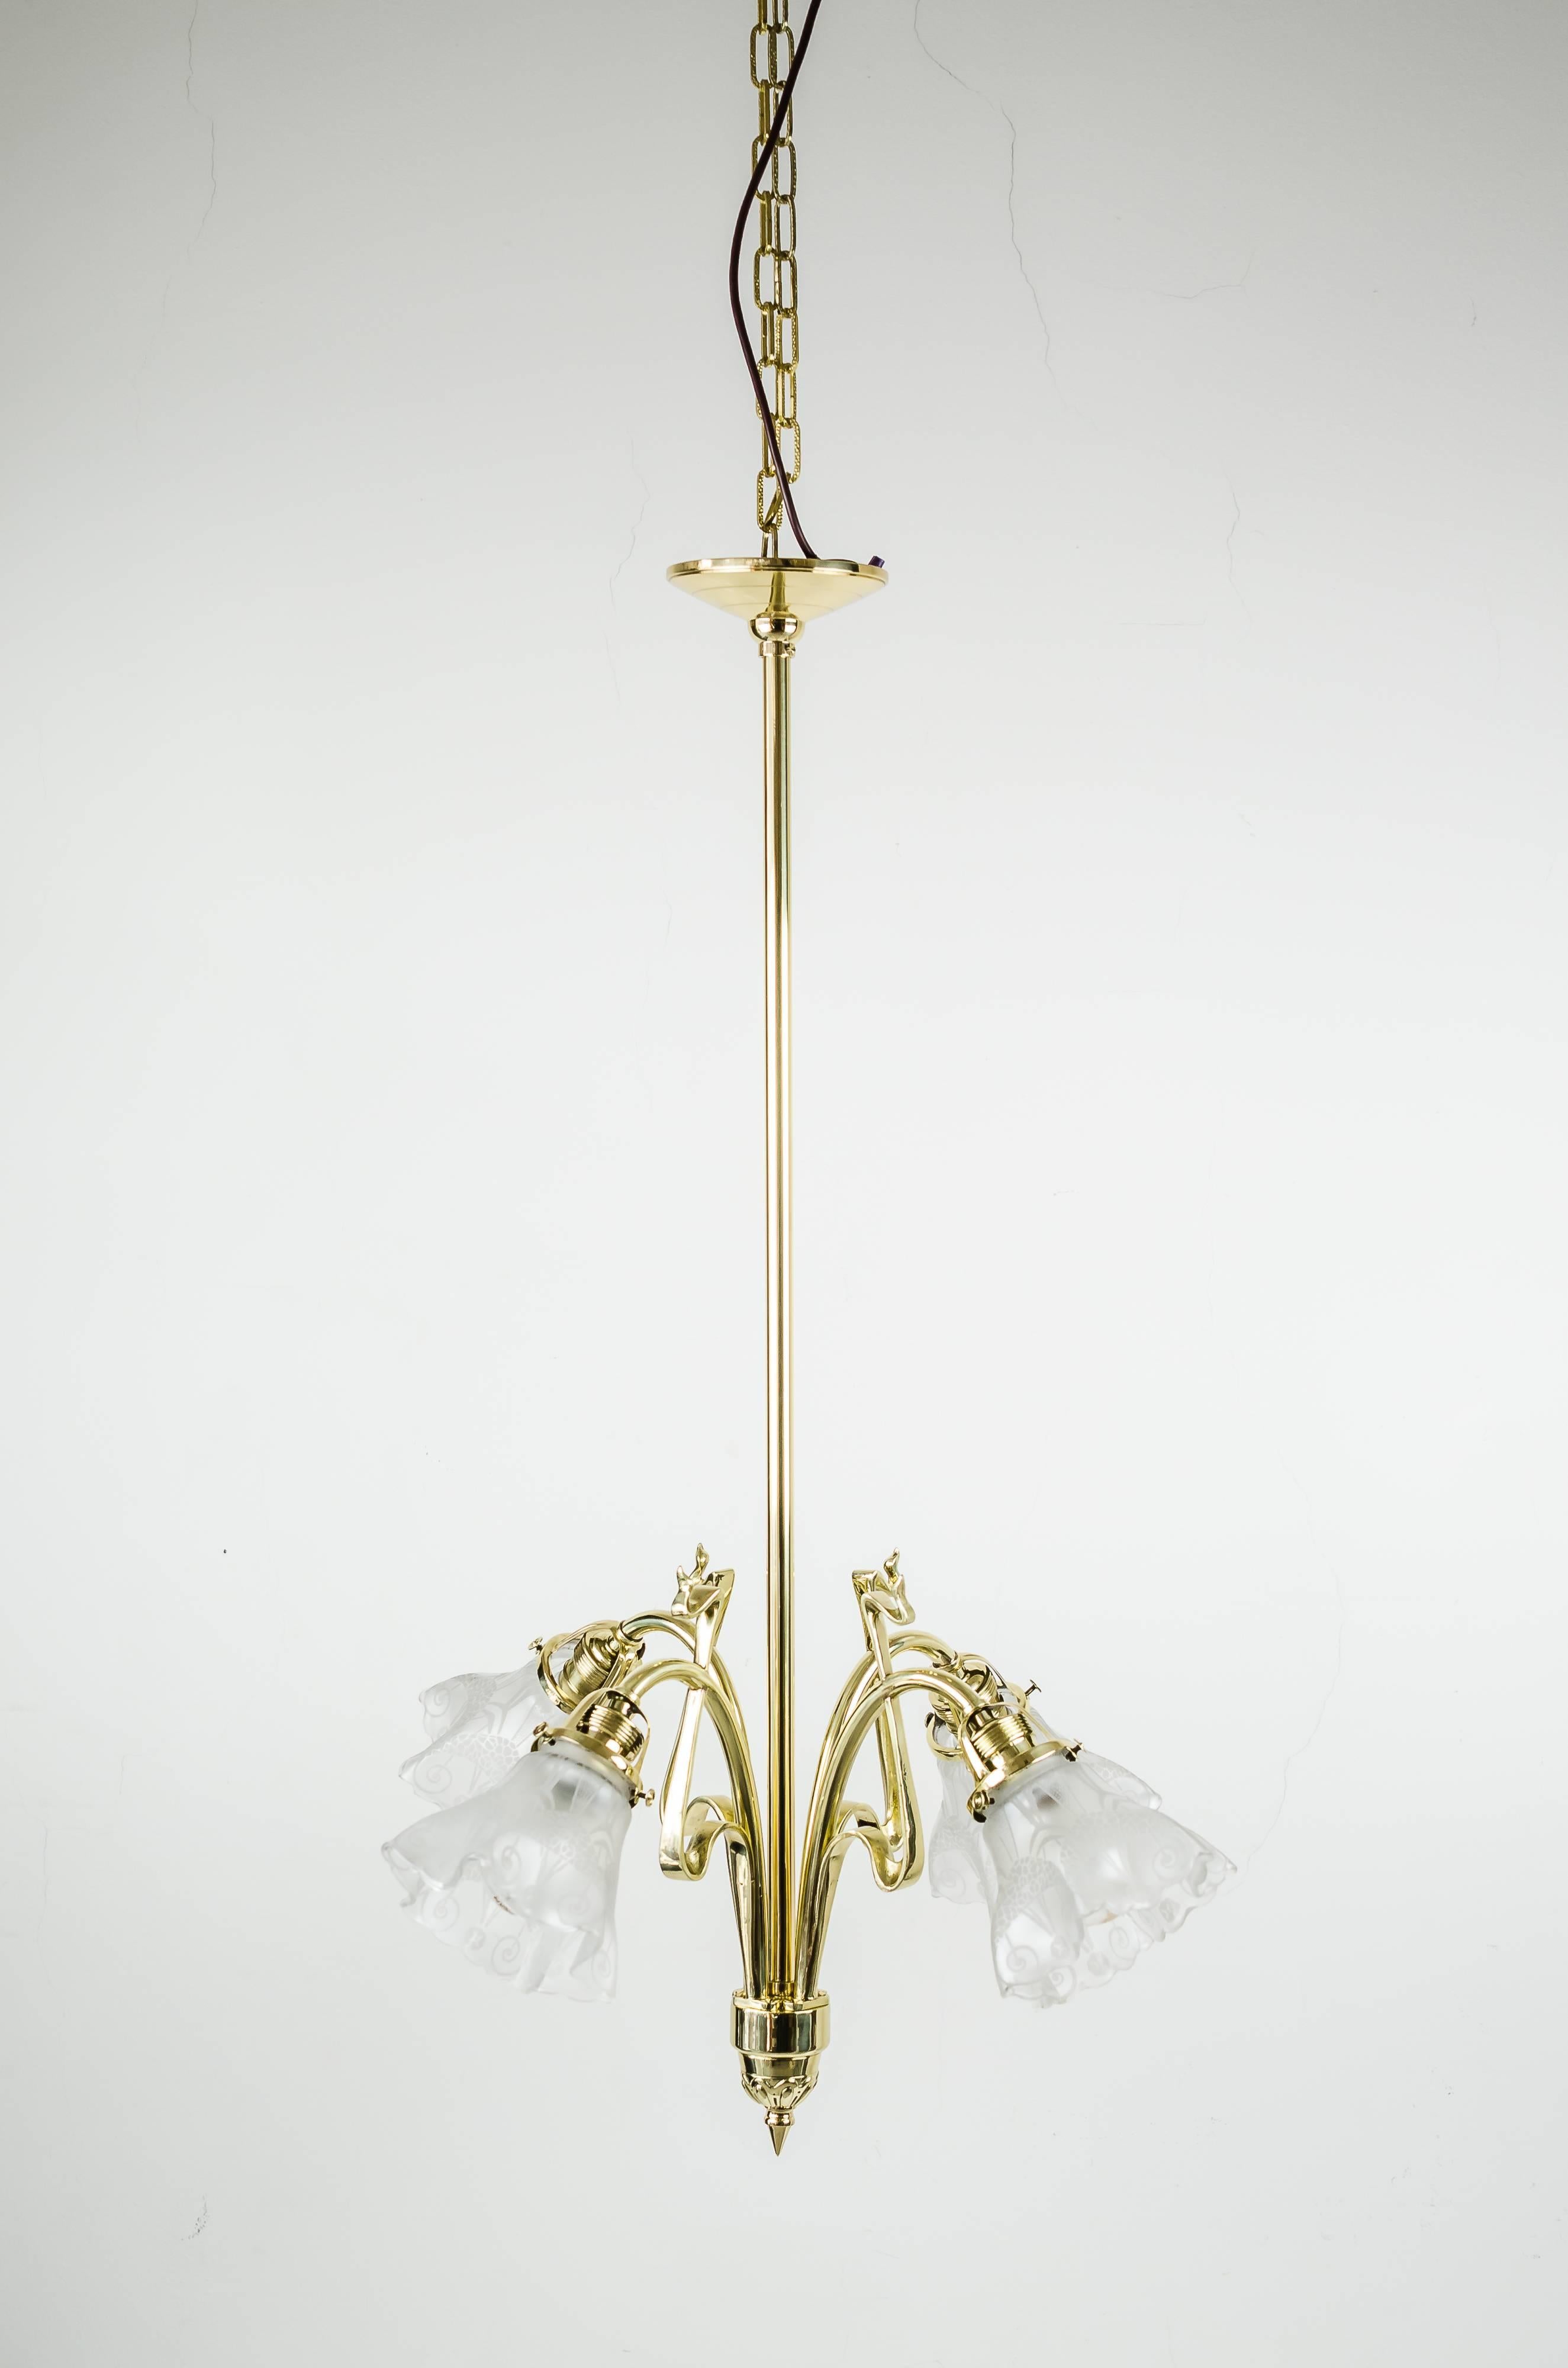 Jugendstil Chandelier circa 1908s with Original Glass In Good Condition For Sale In Wien, AT